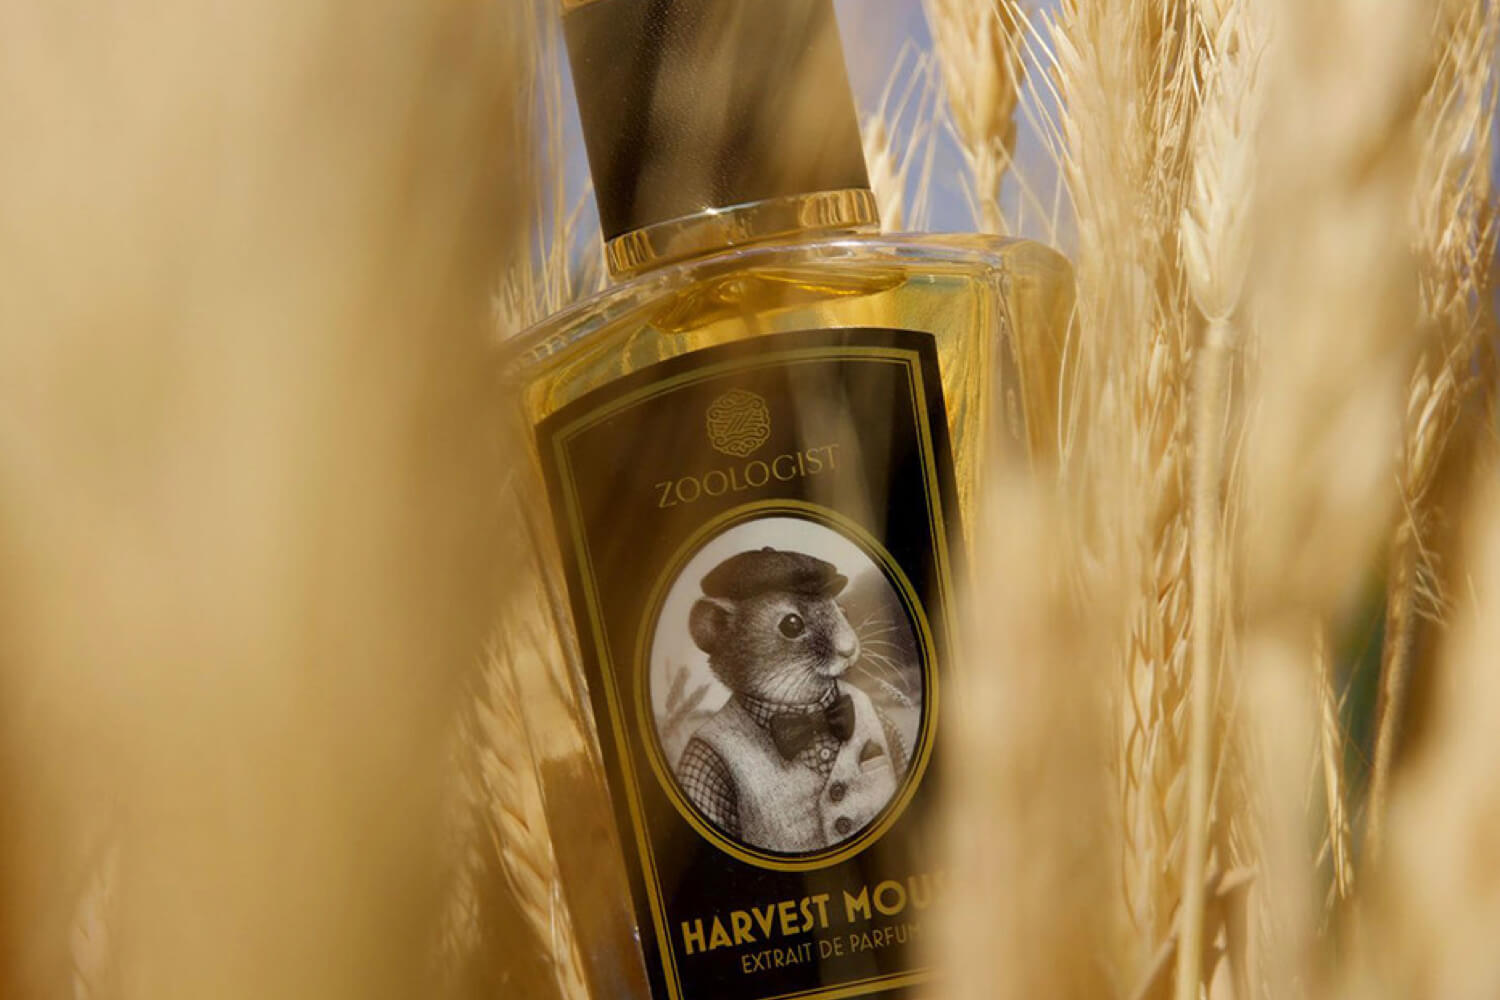 Harvest Mouse - Zoologist Perfumes